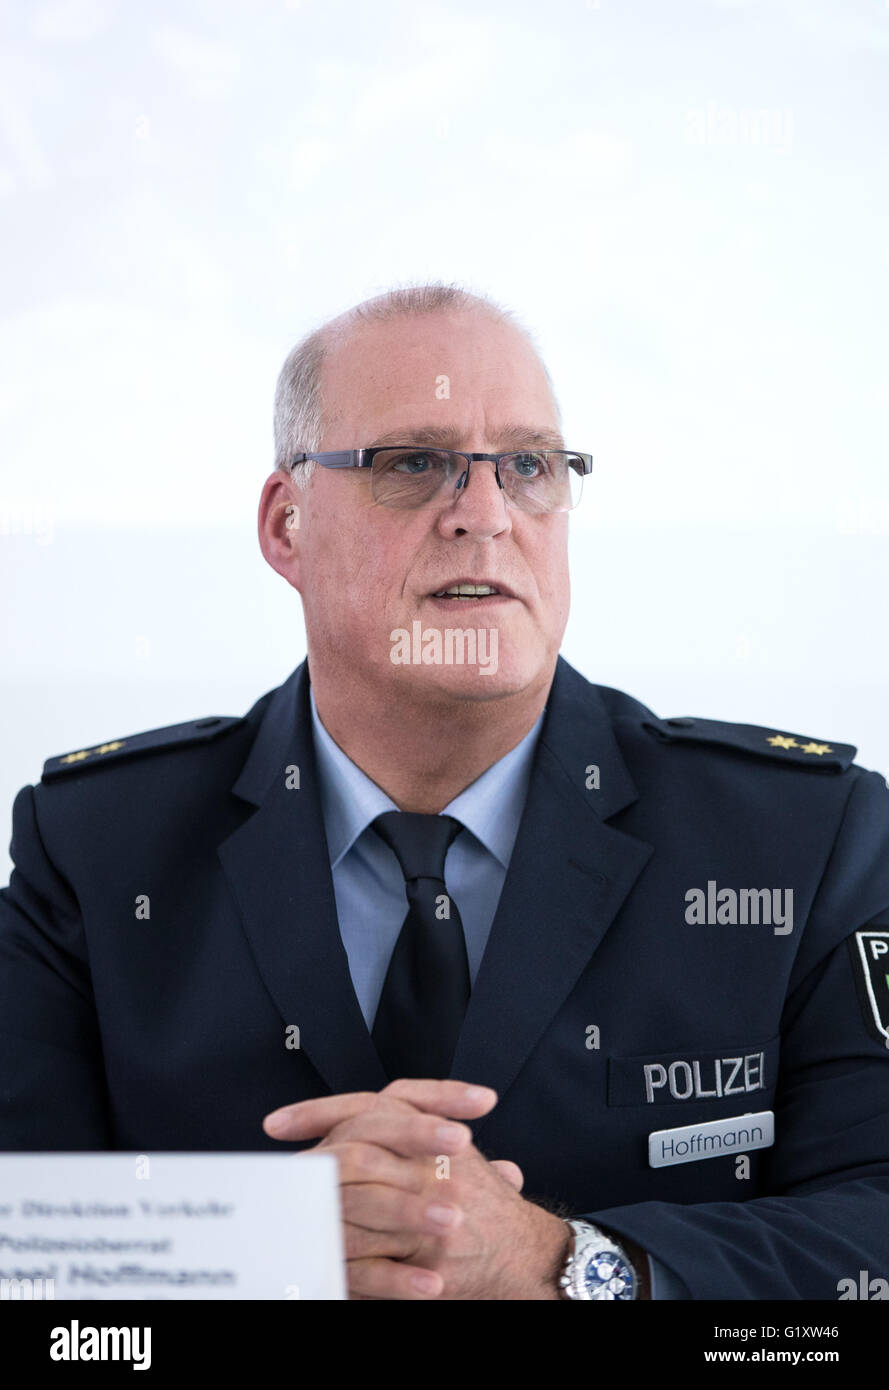 Hagen, Germany. 20th May, 2016. The head of the traffic departement of the police, Michael Hoffmann, speaks during a press conference after a car crash connected to an illegal car race the night befor in Hagen, Germany, 20 May 2016. Five people were severely injured in an accident which resulted from an illegal car race, some of which were not part of the race. Among them were two children. According to the police two cars were racing with one car driving on the opposing lane with high speed. Credit:  dpa picture alliance/Alamy Live News Stock Photo